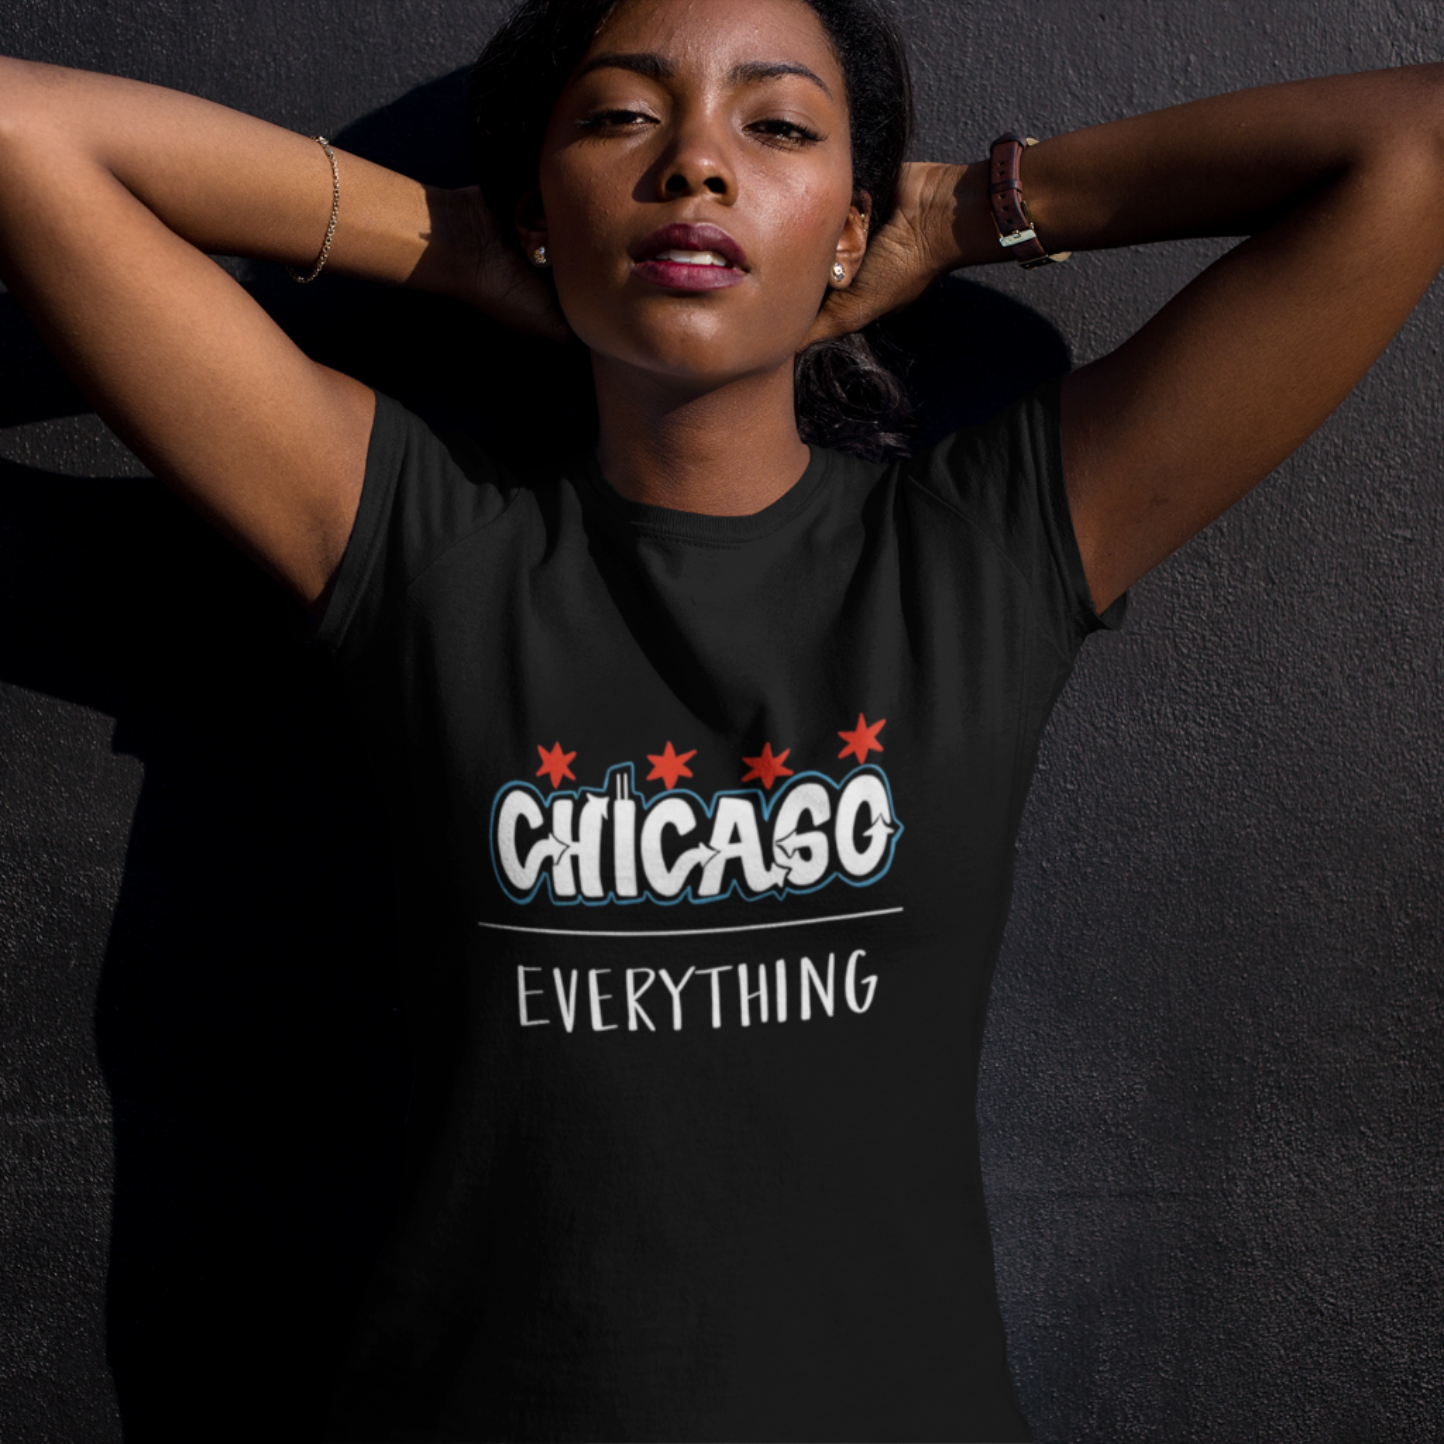 Chicago Over Everything - Women's